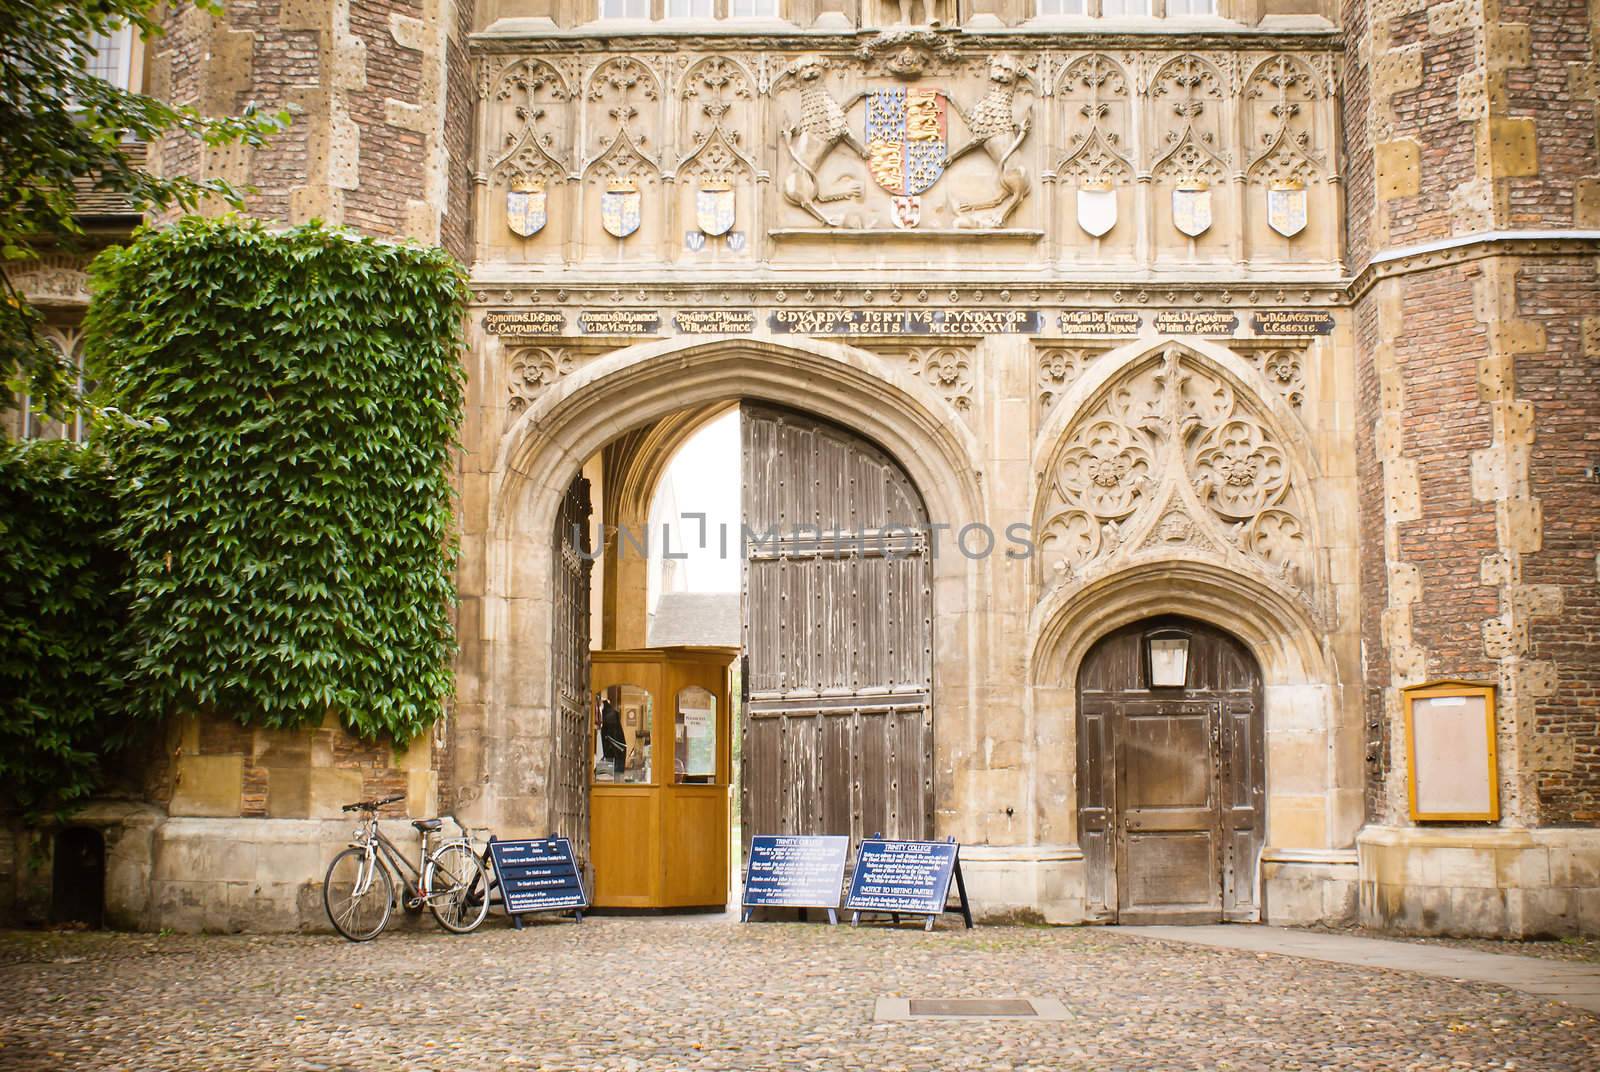 Front entrance to the King's college